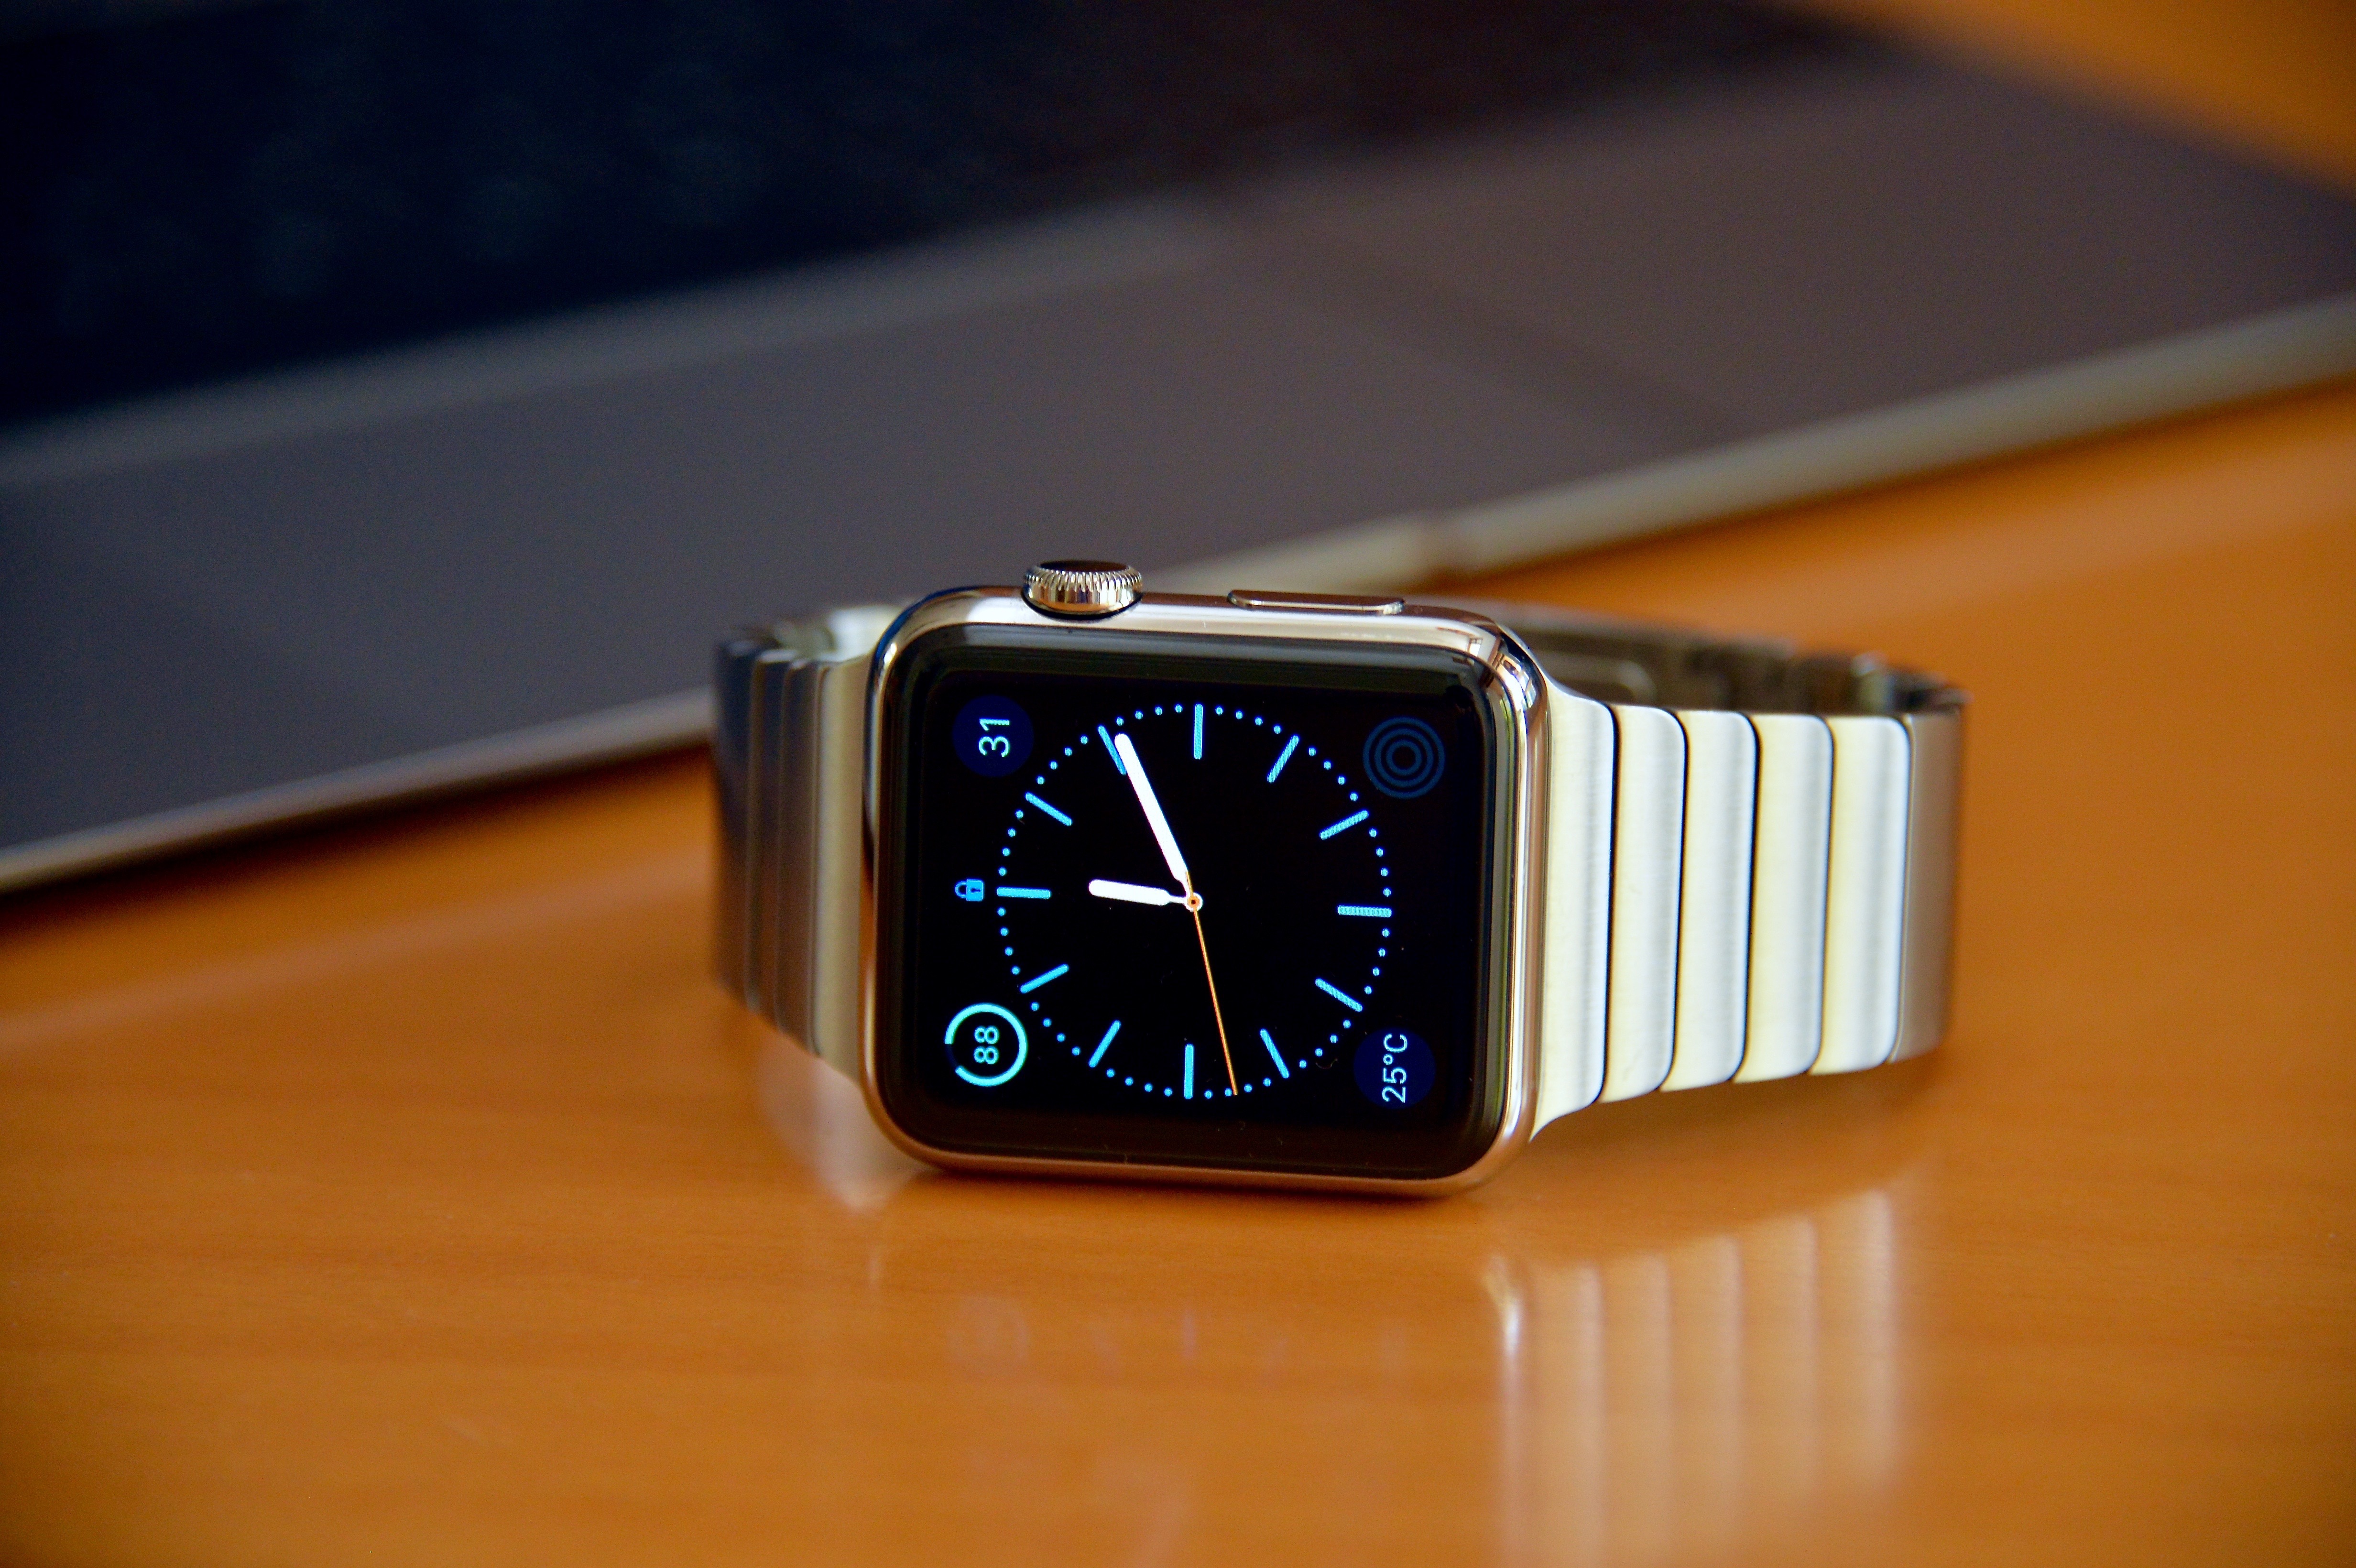 Apple Hopes the Watch Will Sell Just Like the iPod. Seasonally.